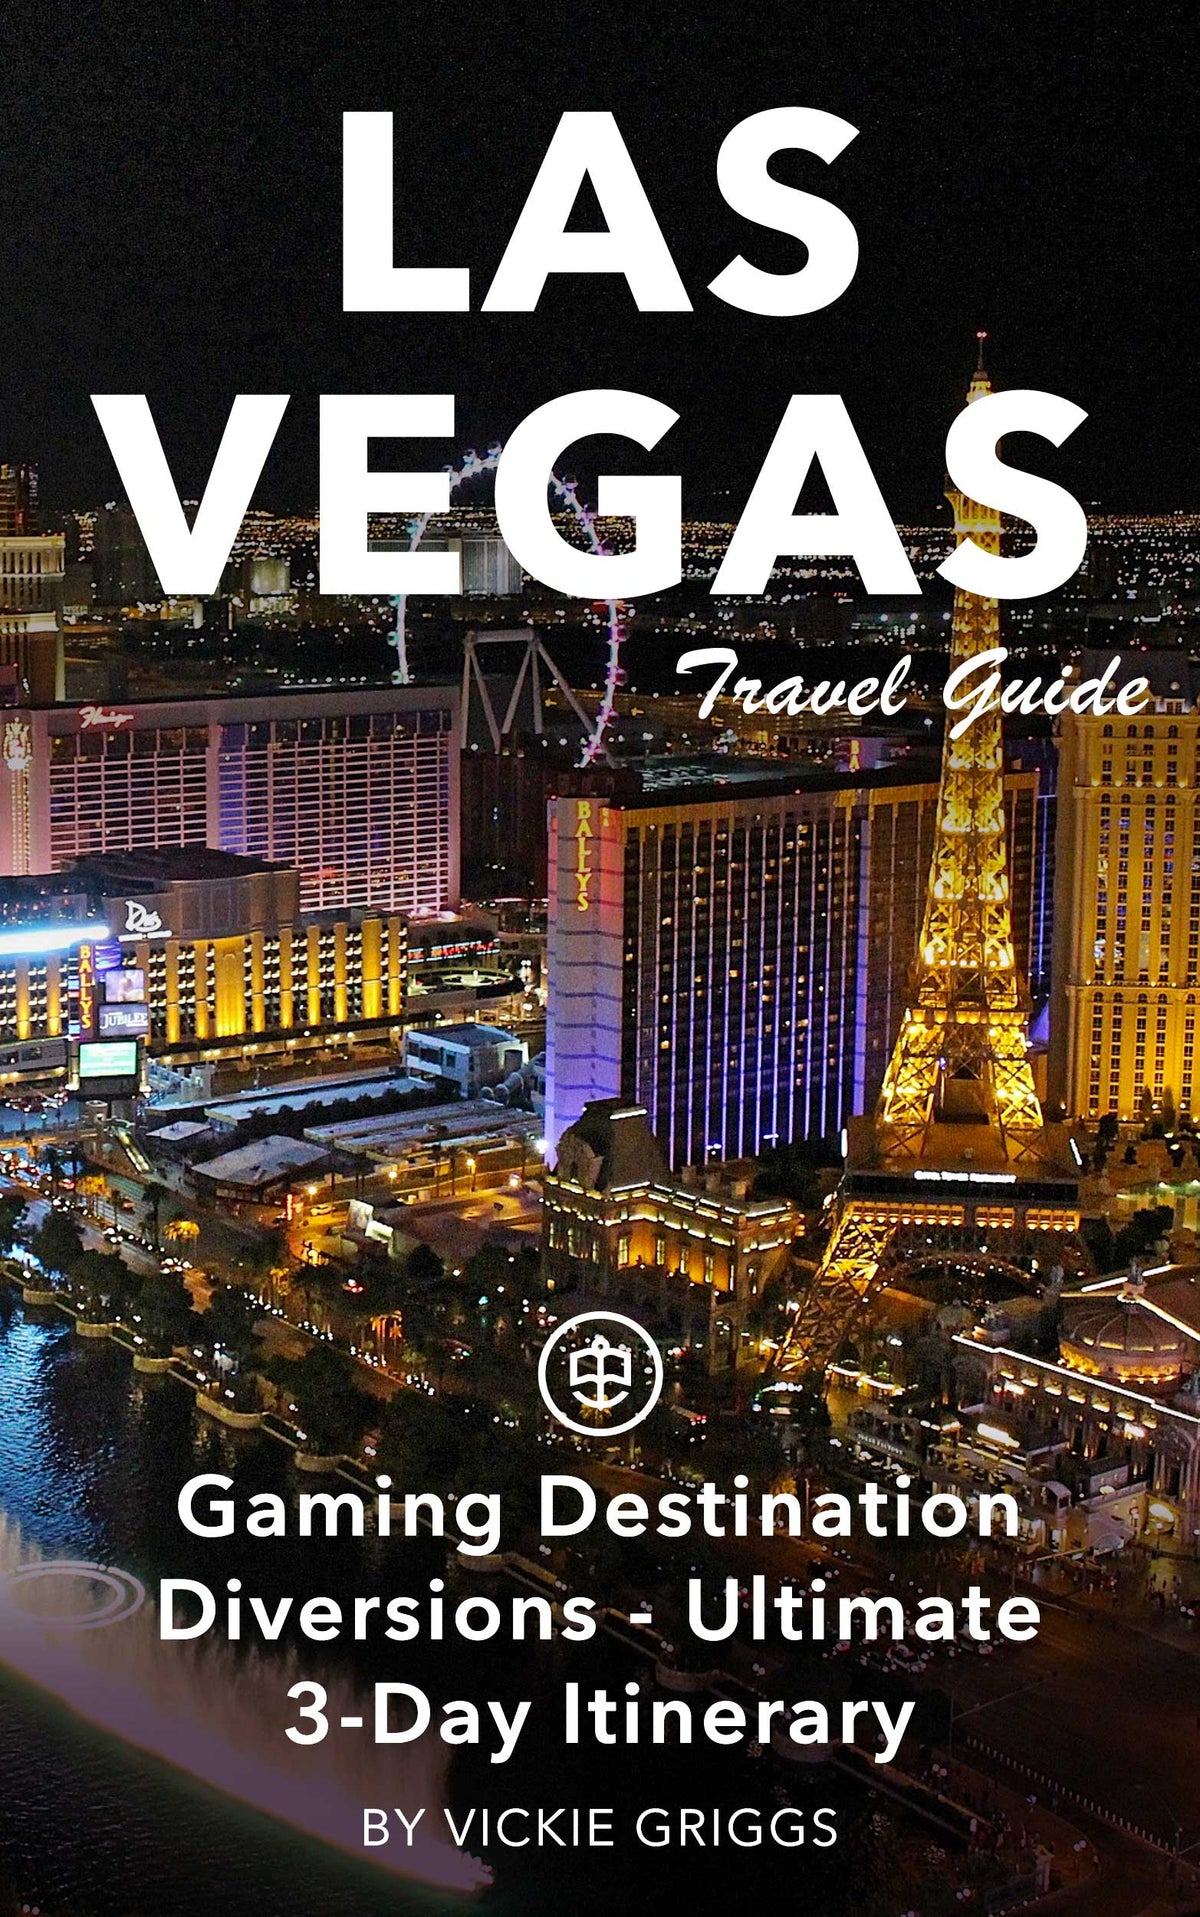 Las Vegas - Gaming Destination Diversions - Ultimate 3-Day Itinerary